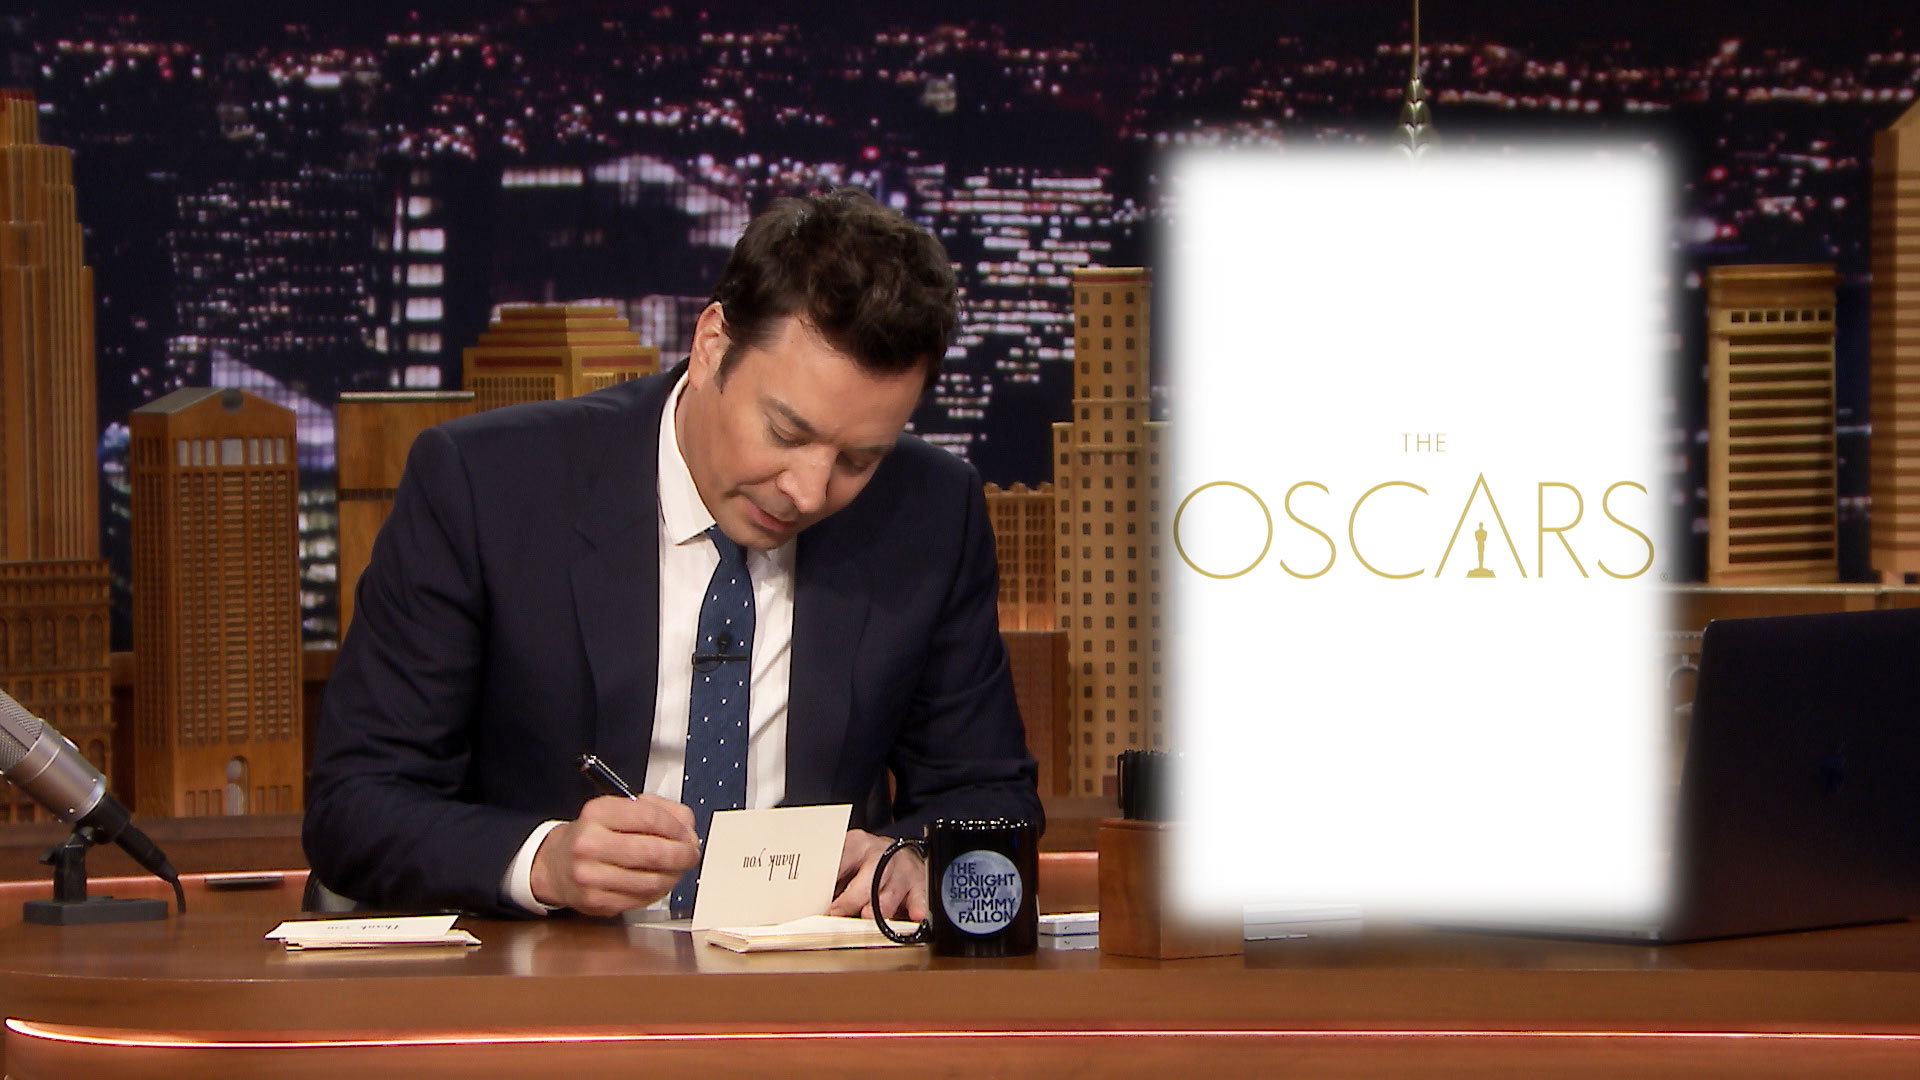 Watch The Tonight Show Starring Jimmy Fallon Highlight: Thank You Notes:  Oscars, Calvin Klein Ad with Shawn Mendes 